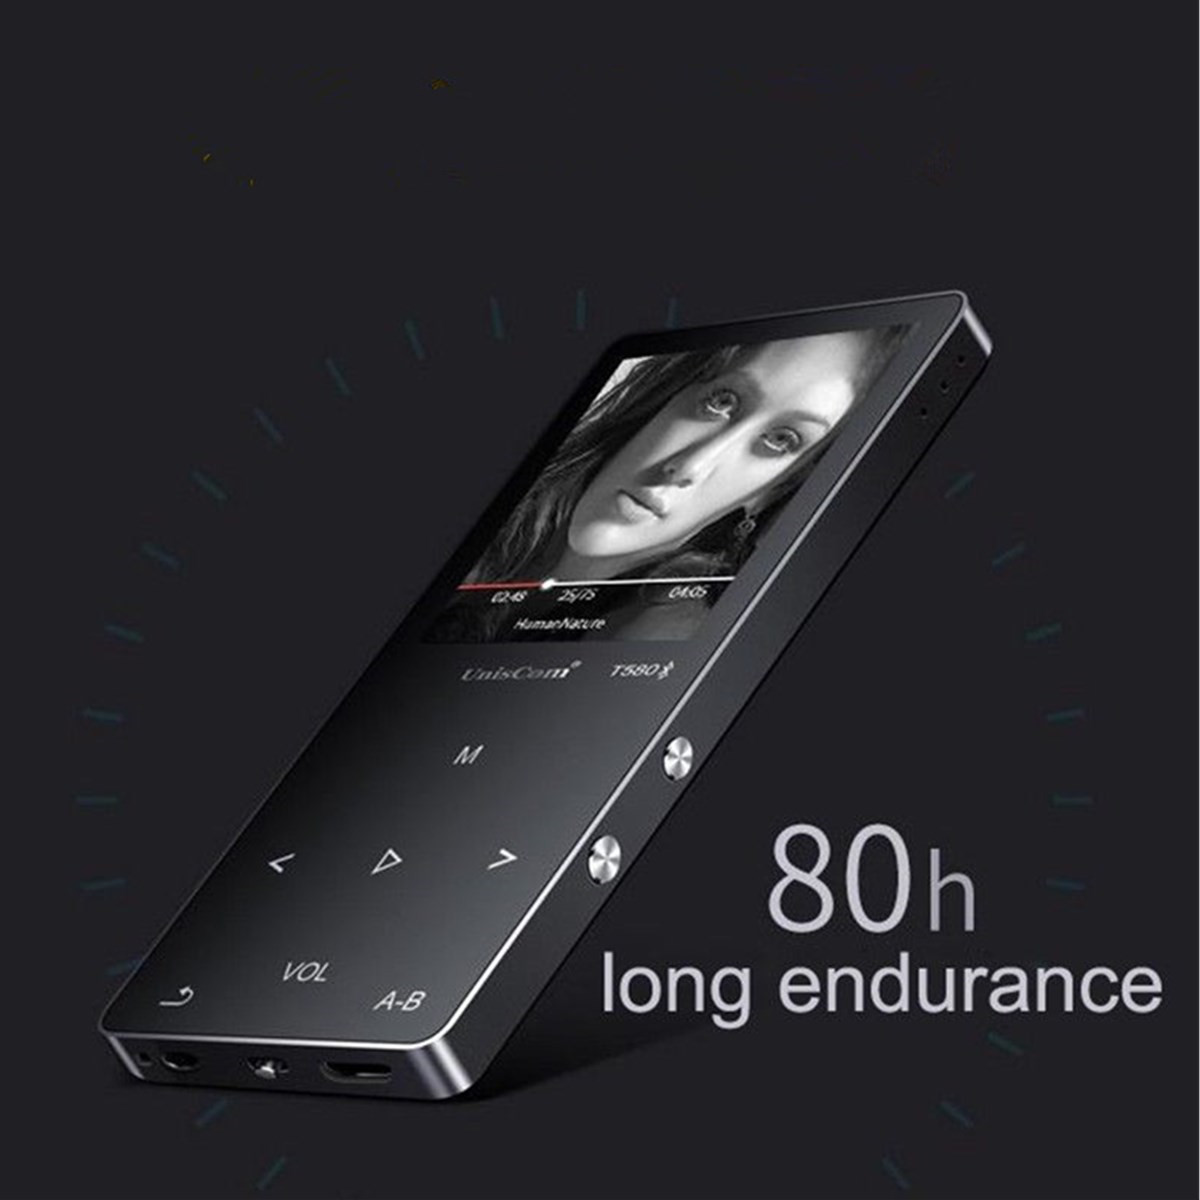 Uniscom 8G 1.8 Inch Screen bluetooth Lossless HIFI MP3 Music Player Support A-B Repeat Voice Record 34